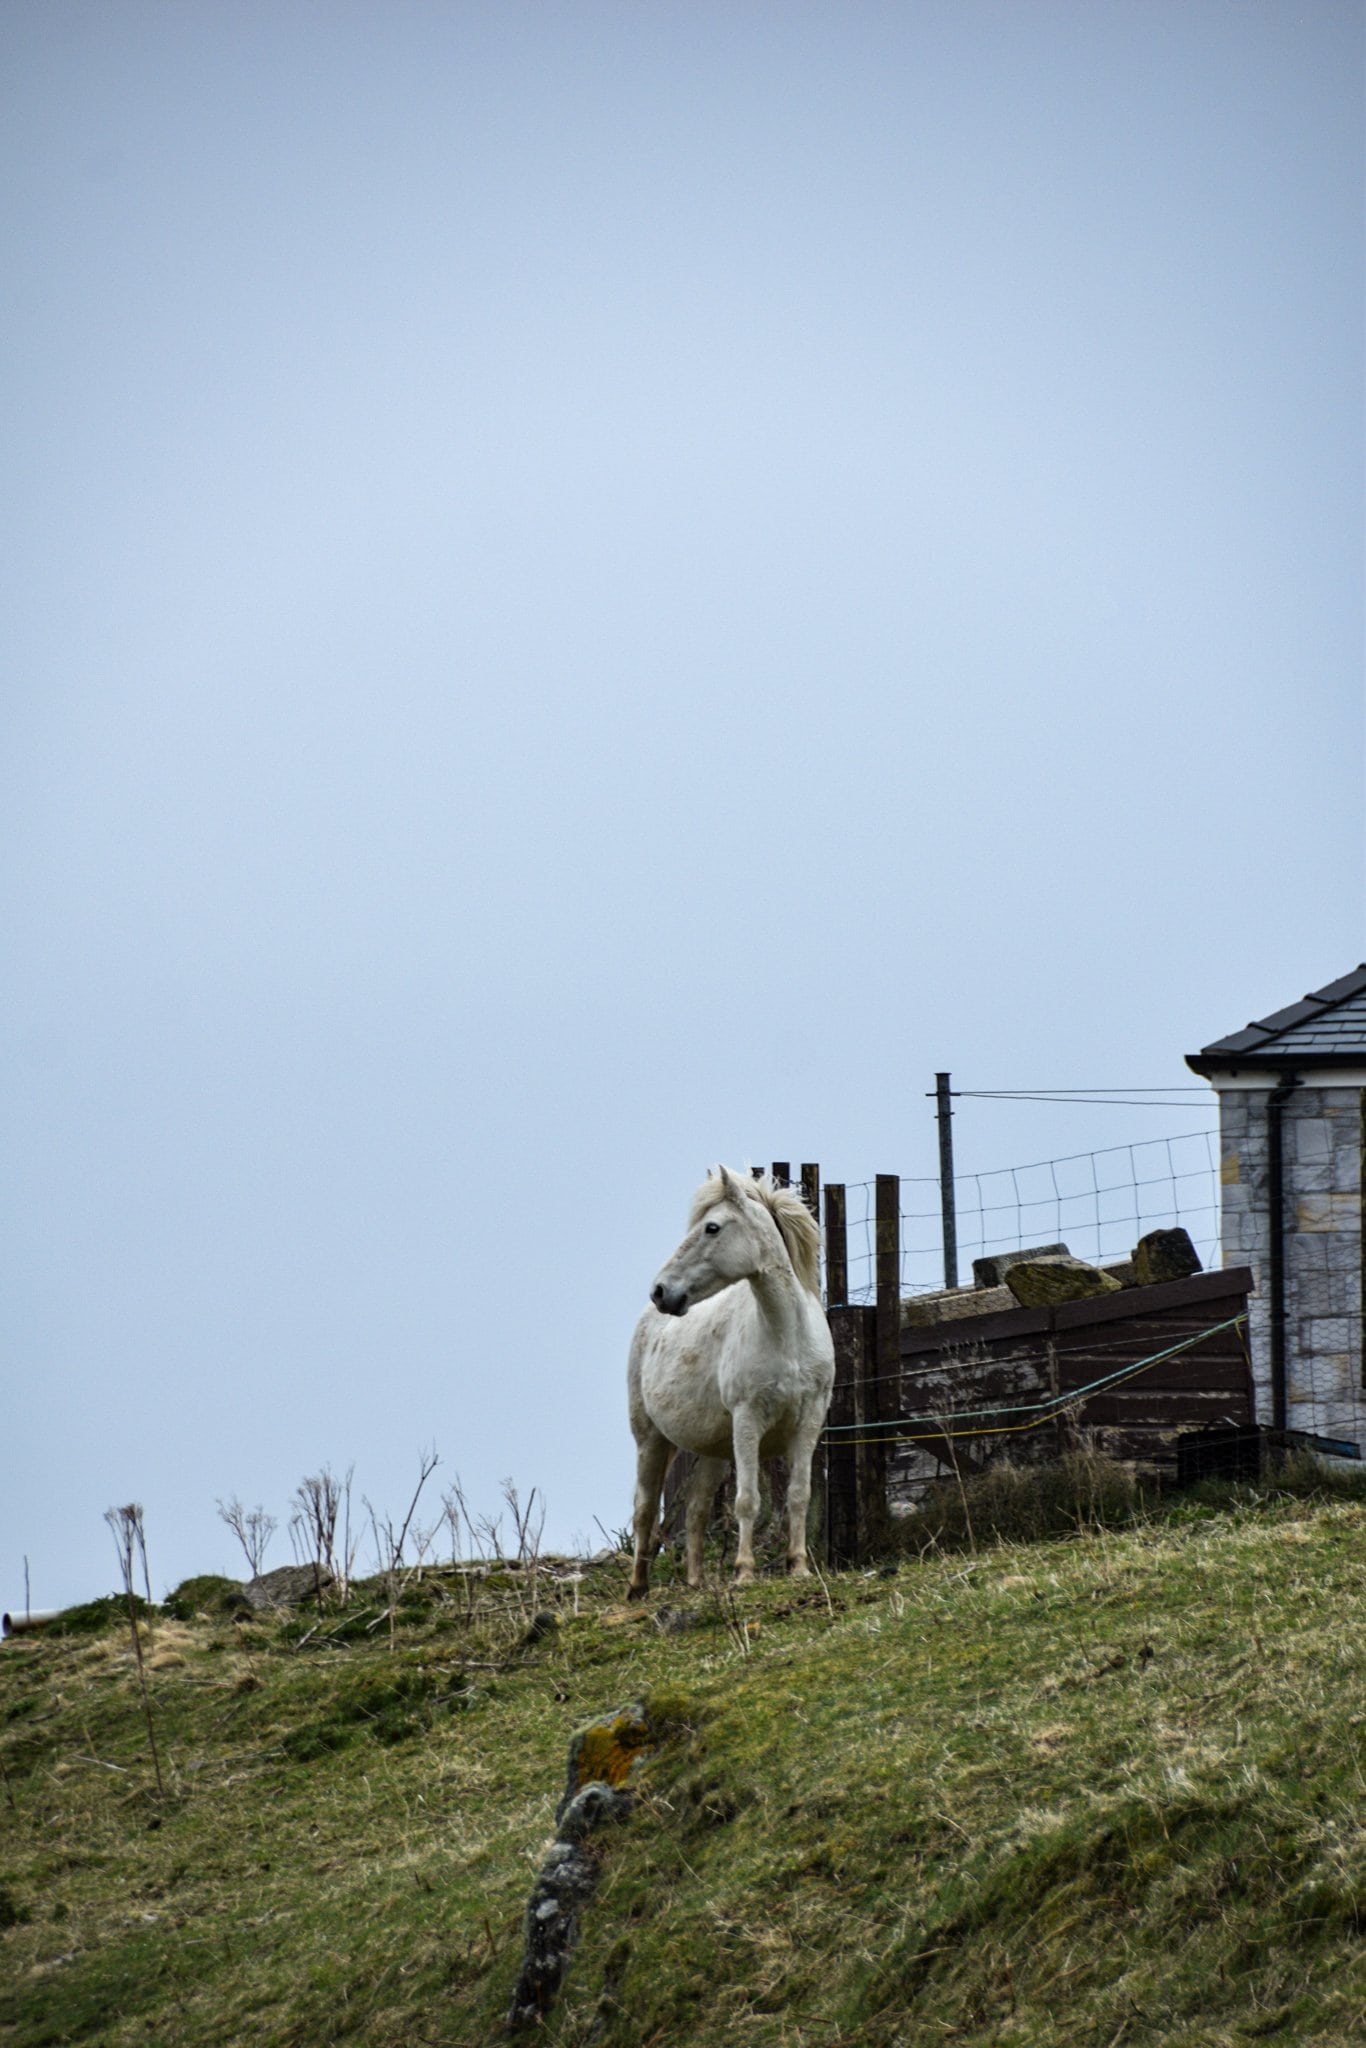 a white horse stands next to a fence